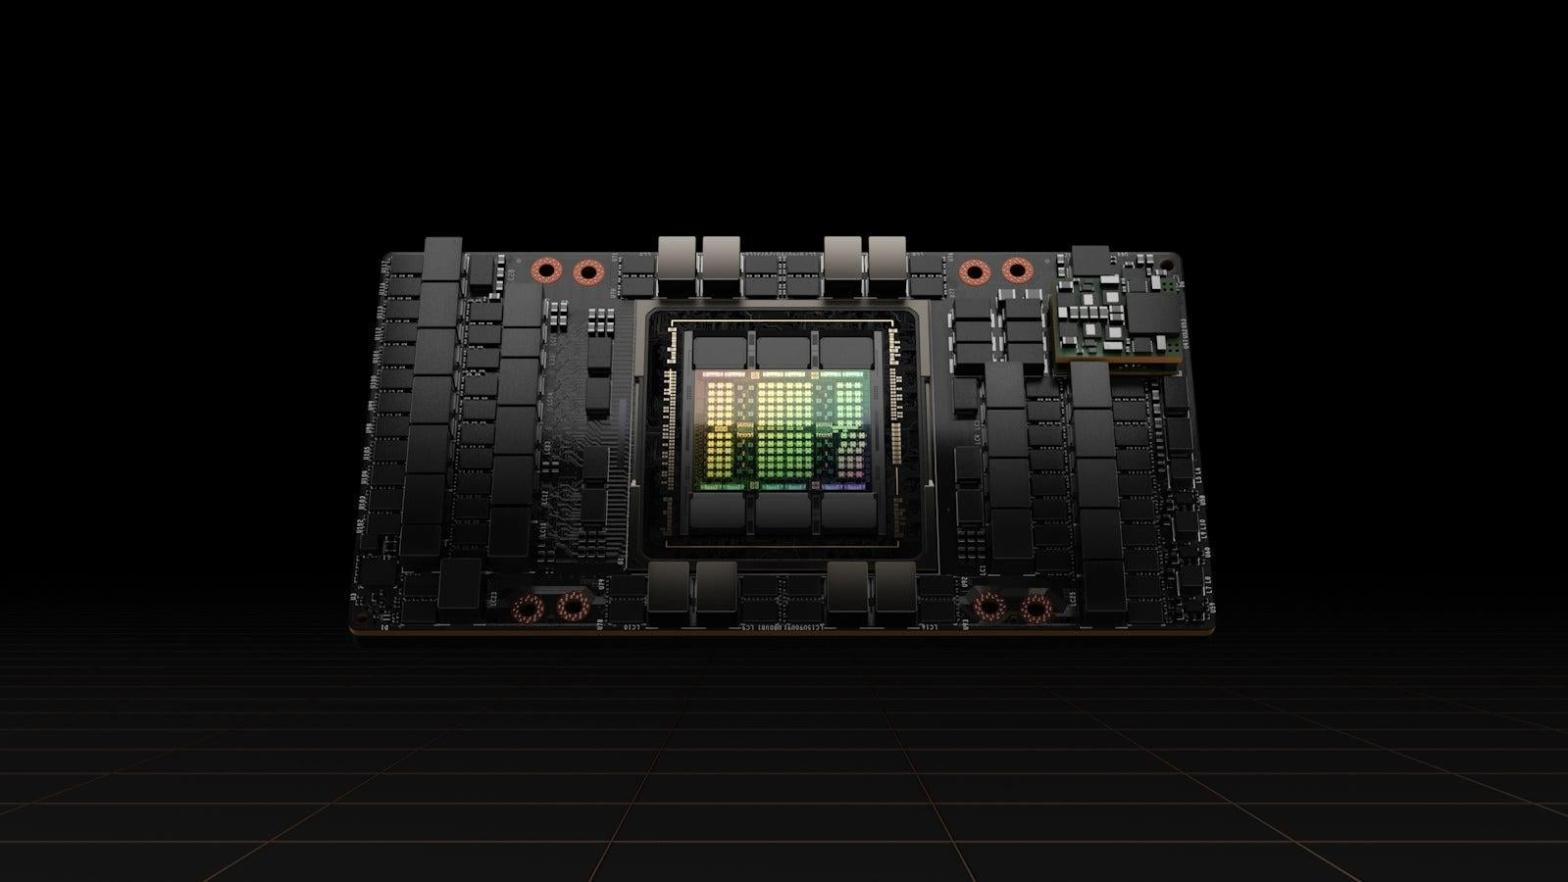 Nvidia's Hopper H100 GPU is specifically designed to assist AI development. Microsoft is trying to find a way to cut its reliance on that chipmaker's silicon.  (Image: Nvidia)